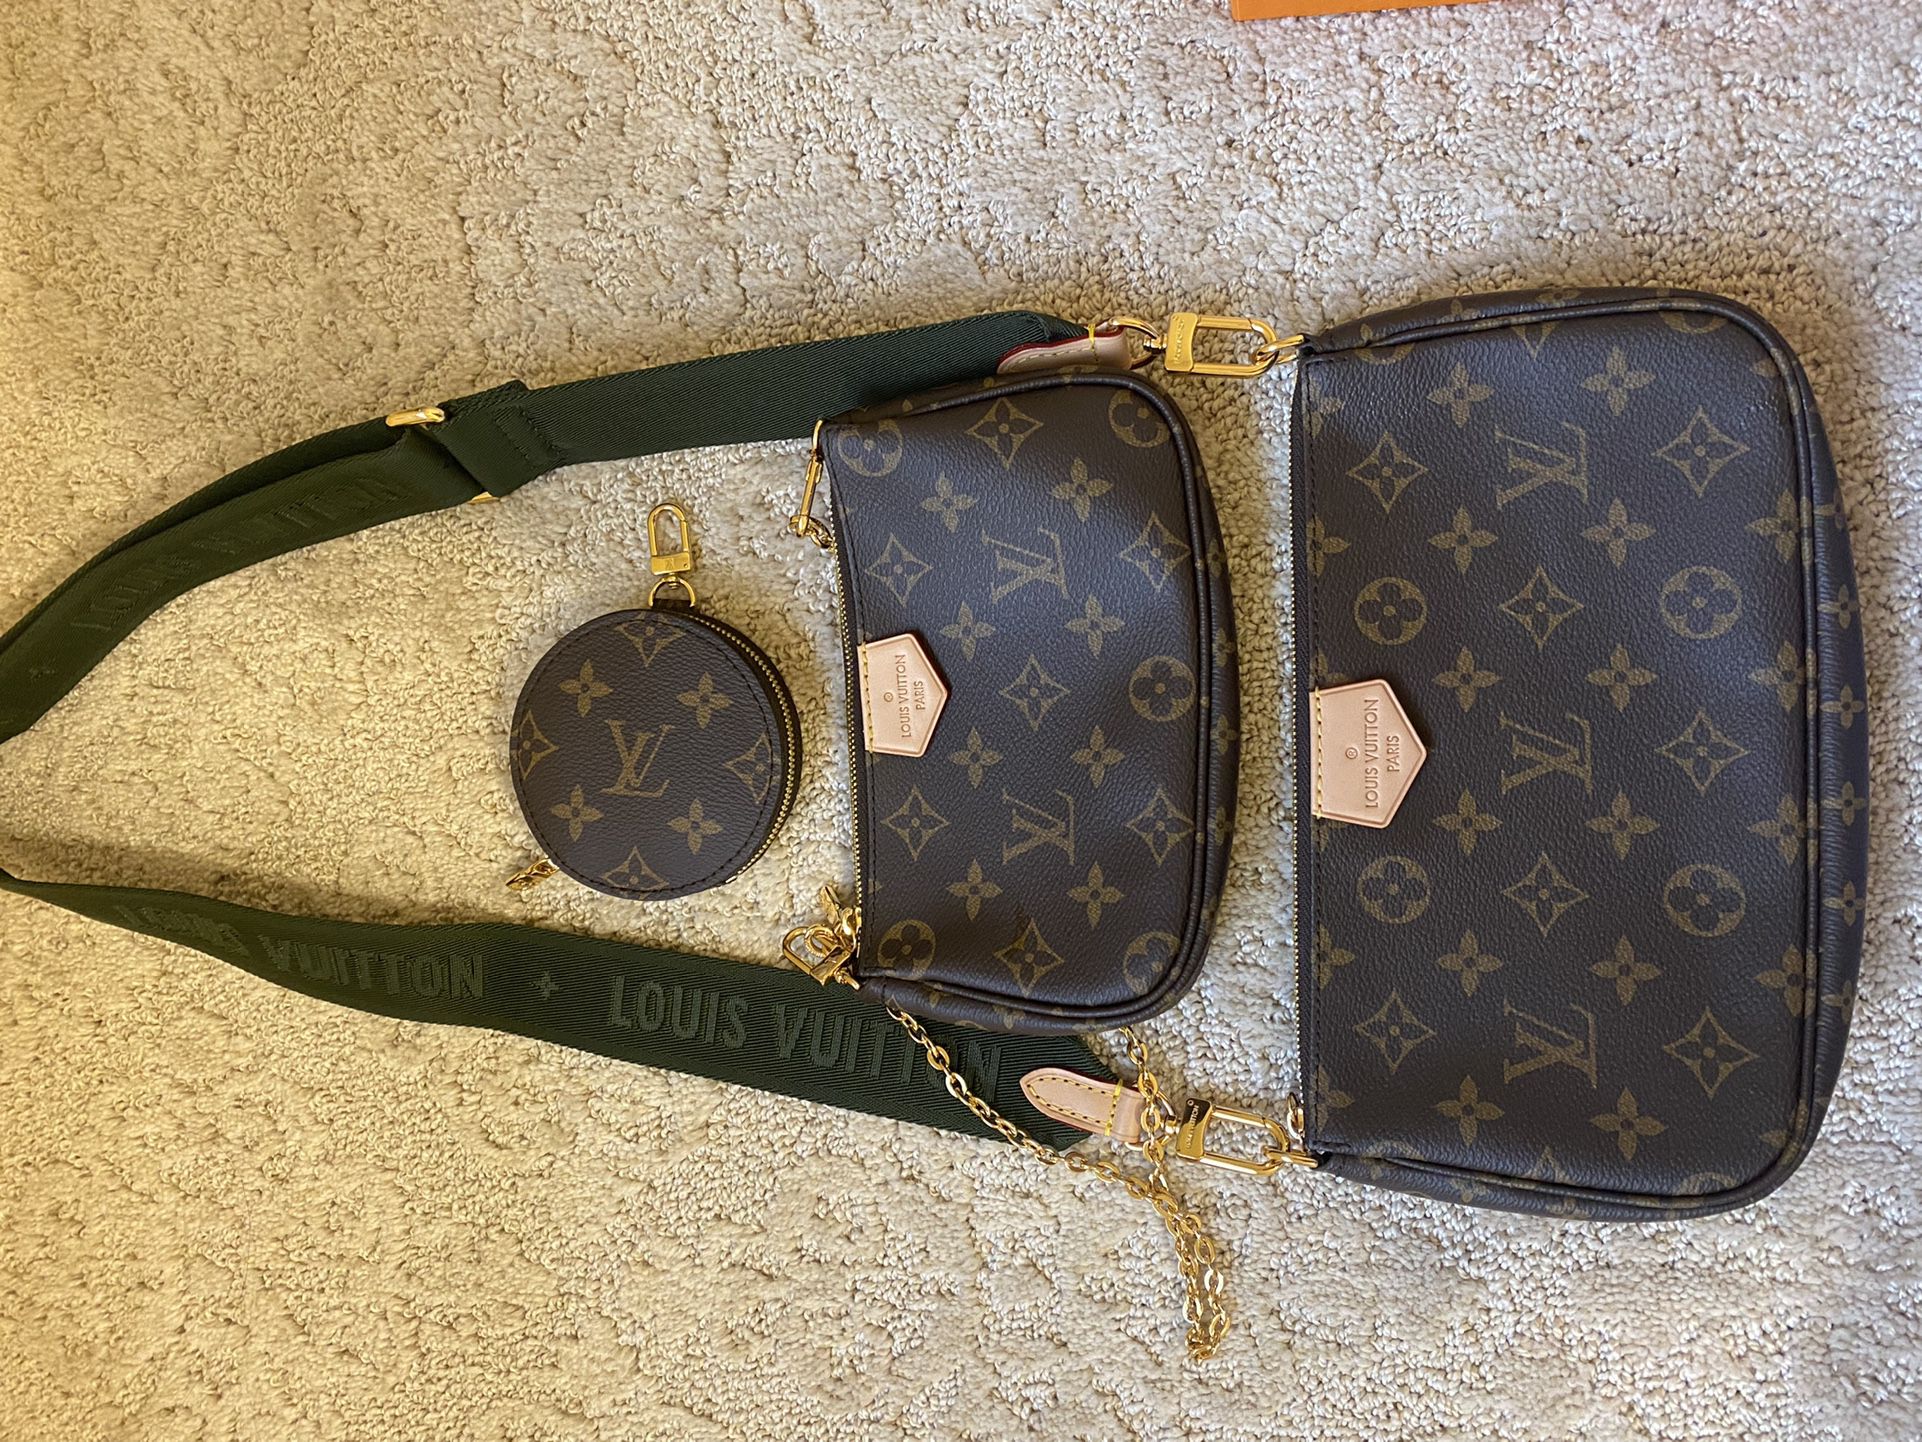 louis vuitton two bags in one